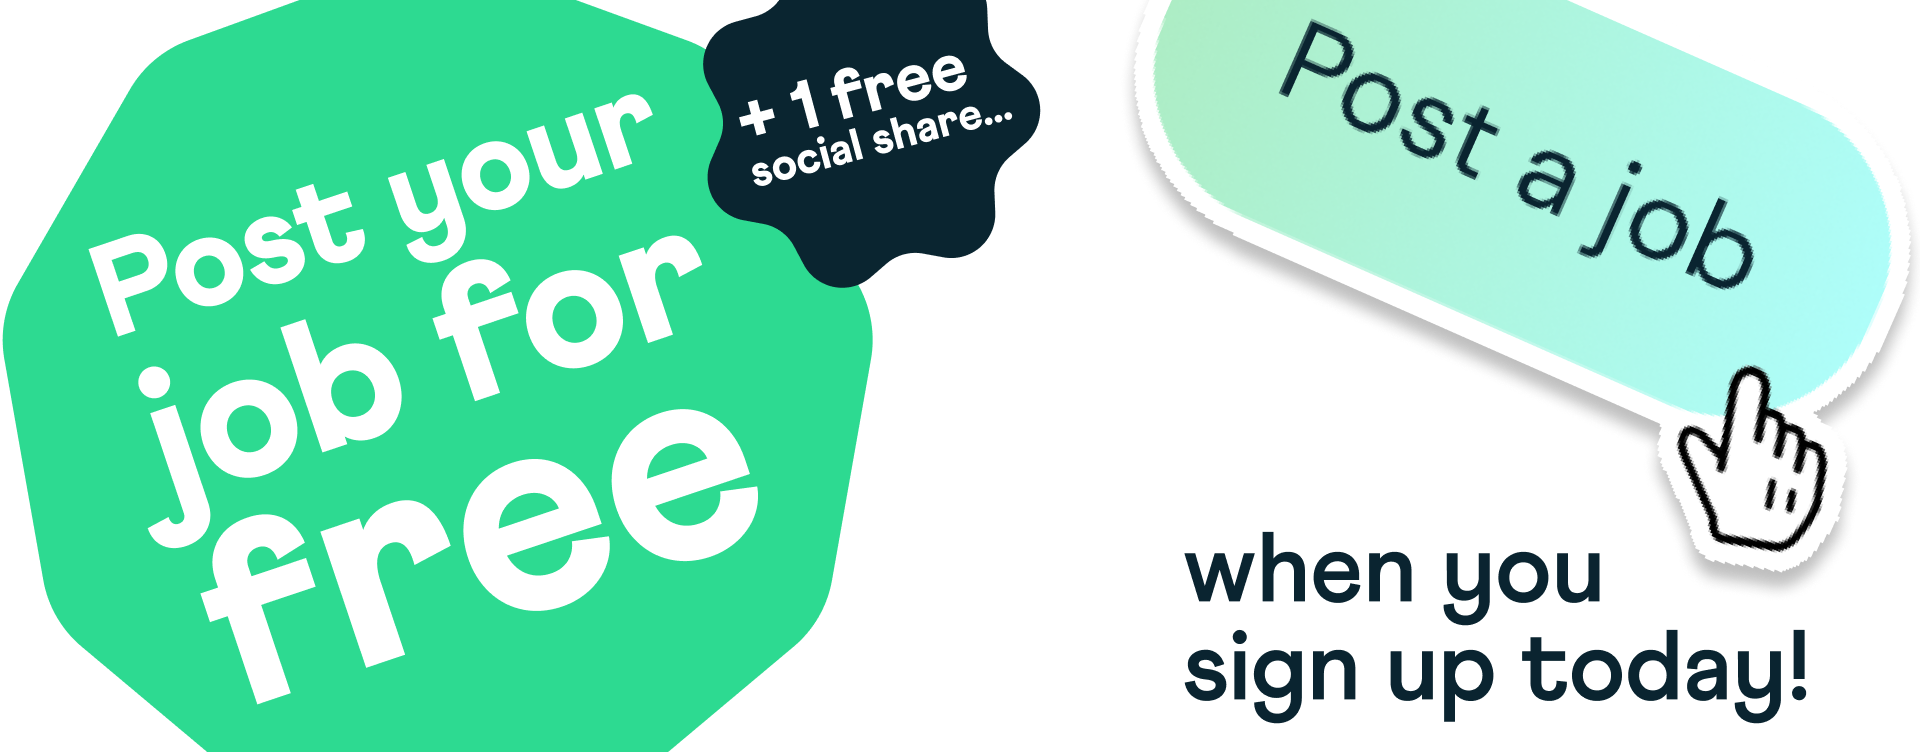 post-your-job-for-free-plus-one-free-social-share-post-a-job-button